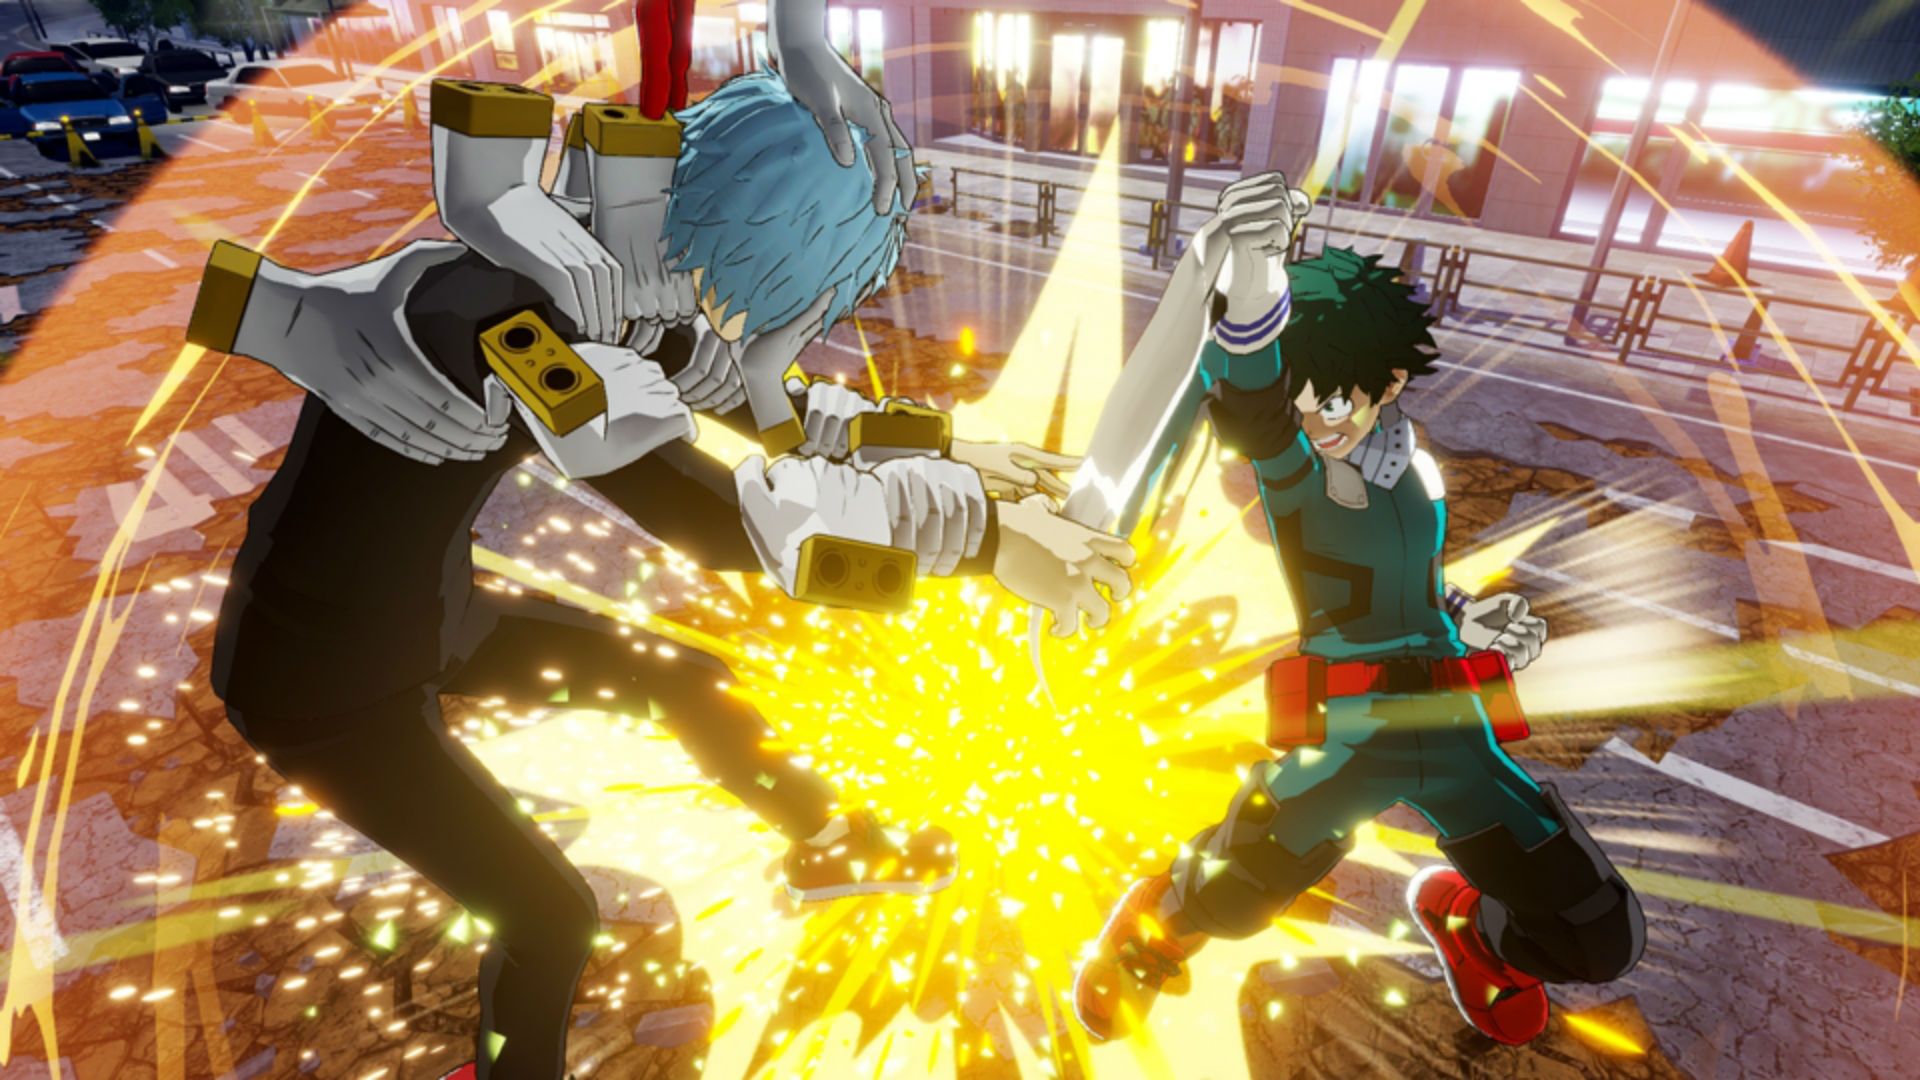 My Hero Academia: One's Justice coming west, here's the first trailer